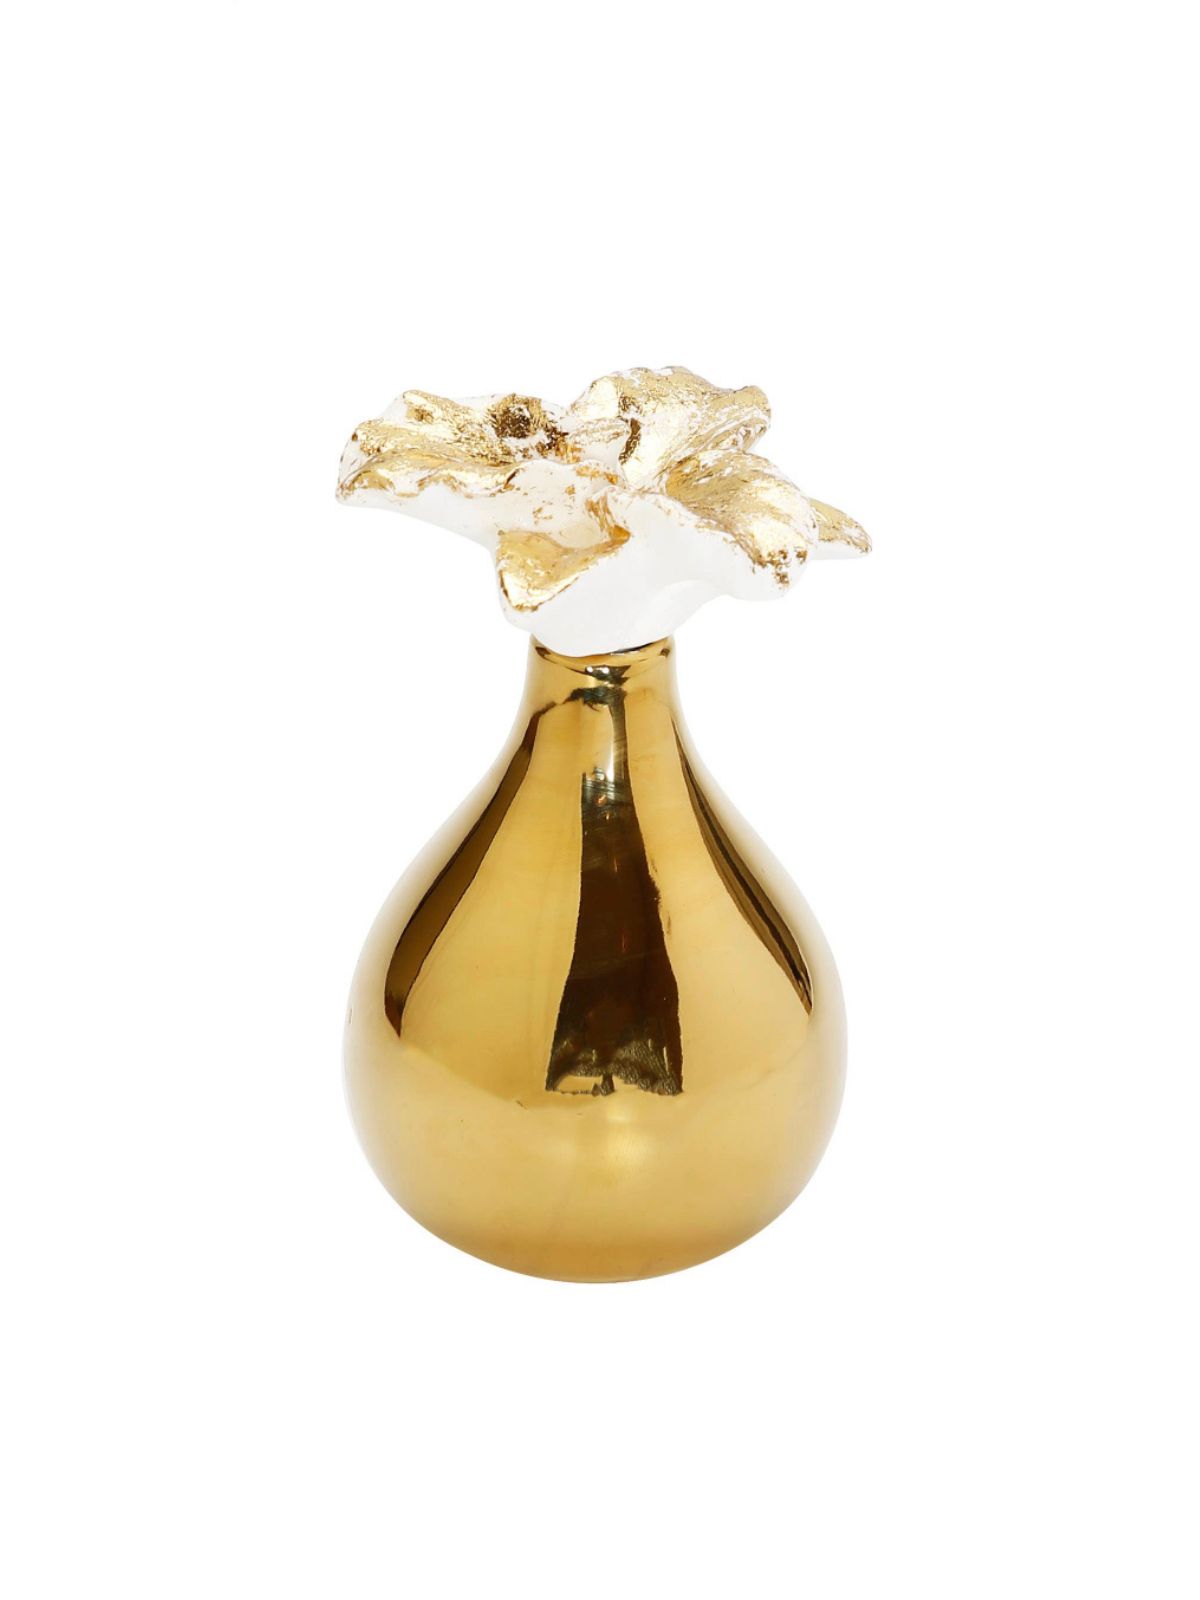 Iris and Rose Scented Diffuser in Polish Gold Narrow Top with Dimensional White Flower Sold by KYA Home Decor. 